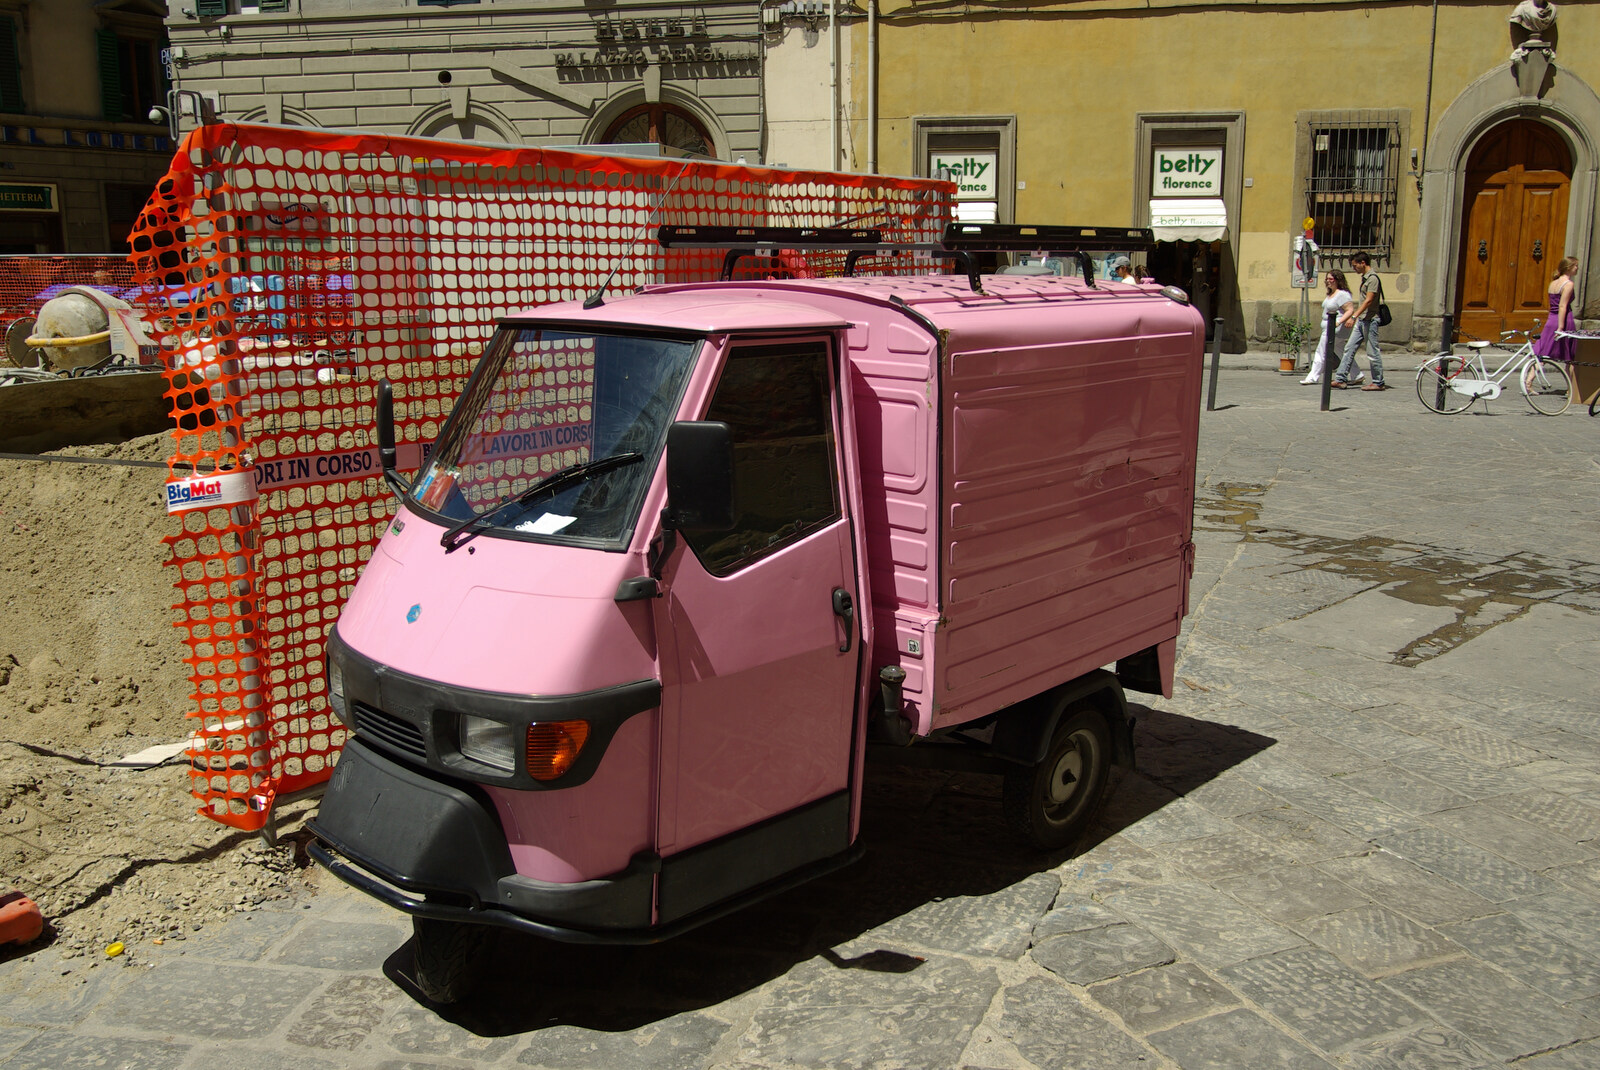 A Day Trip to Firenze, Tuscany, Italy - 24th July 2008: Pieter spots a cute pink three-wheeler van